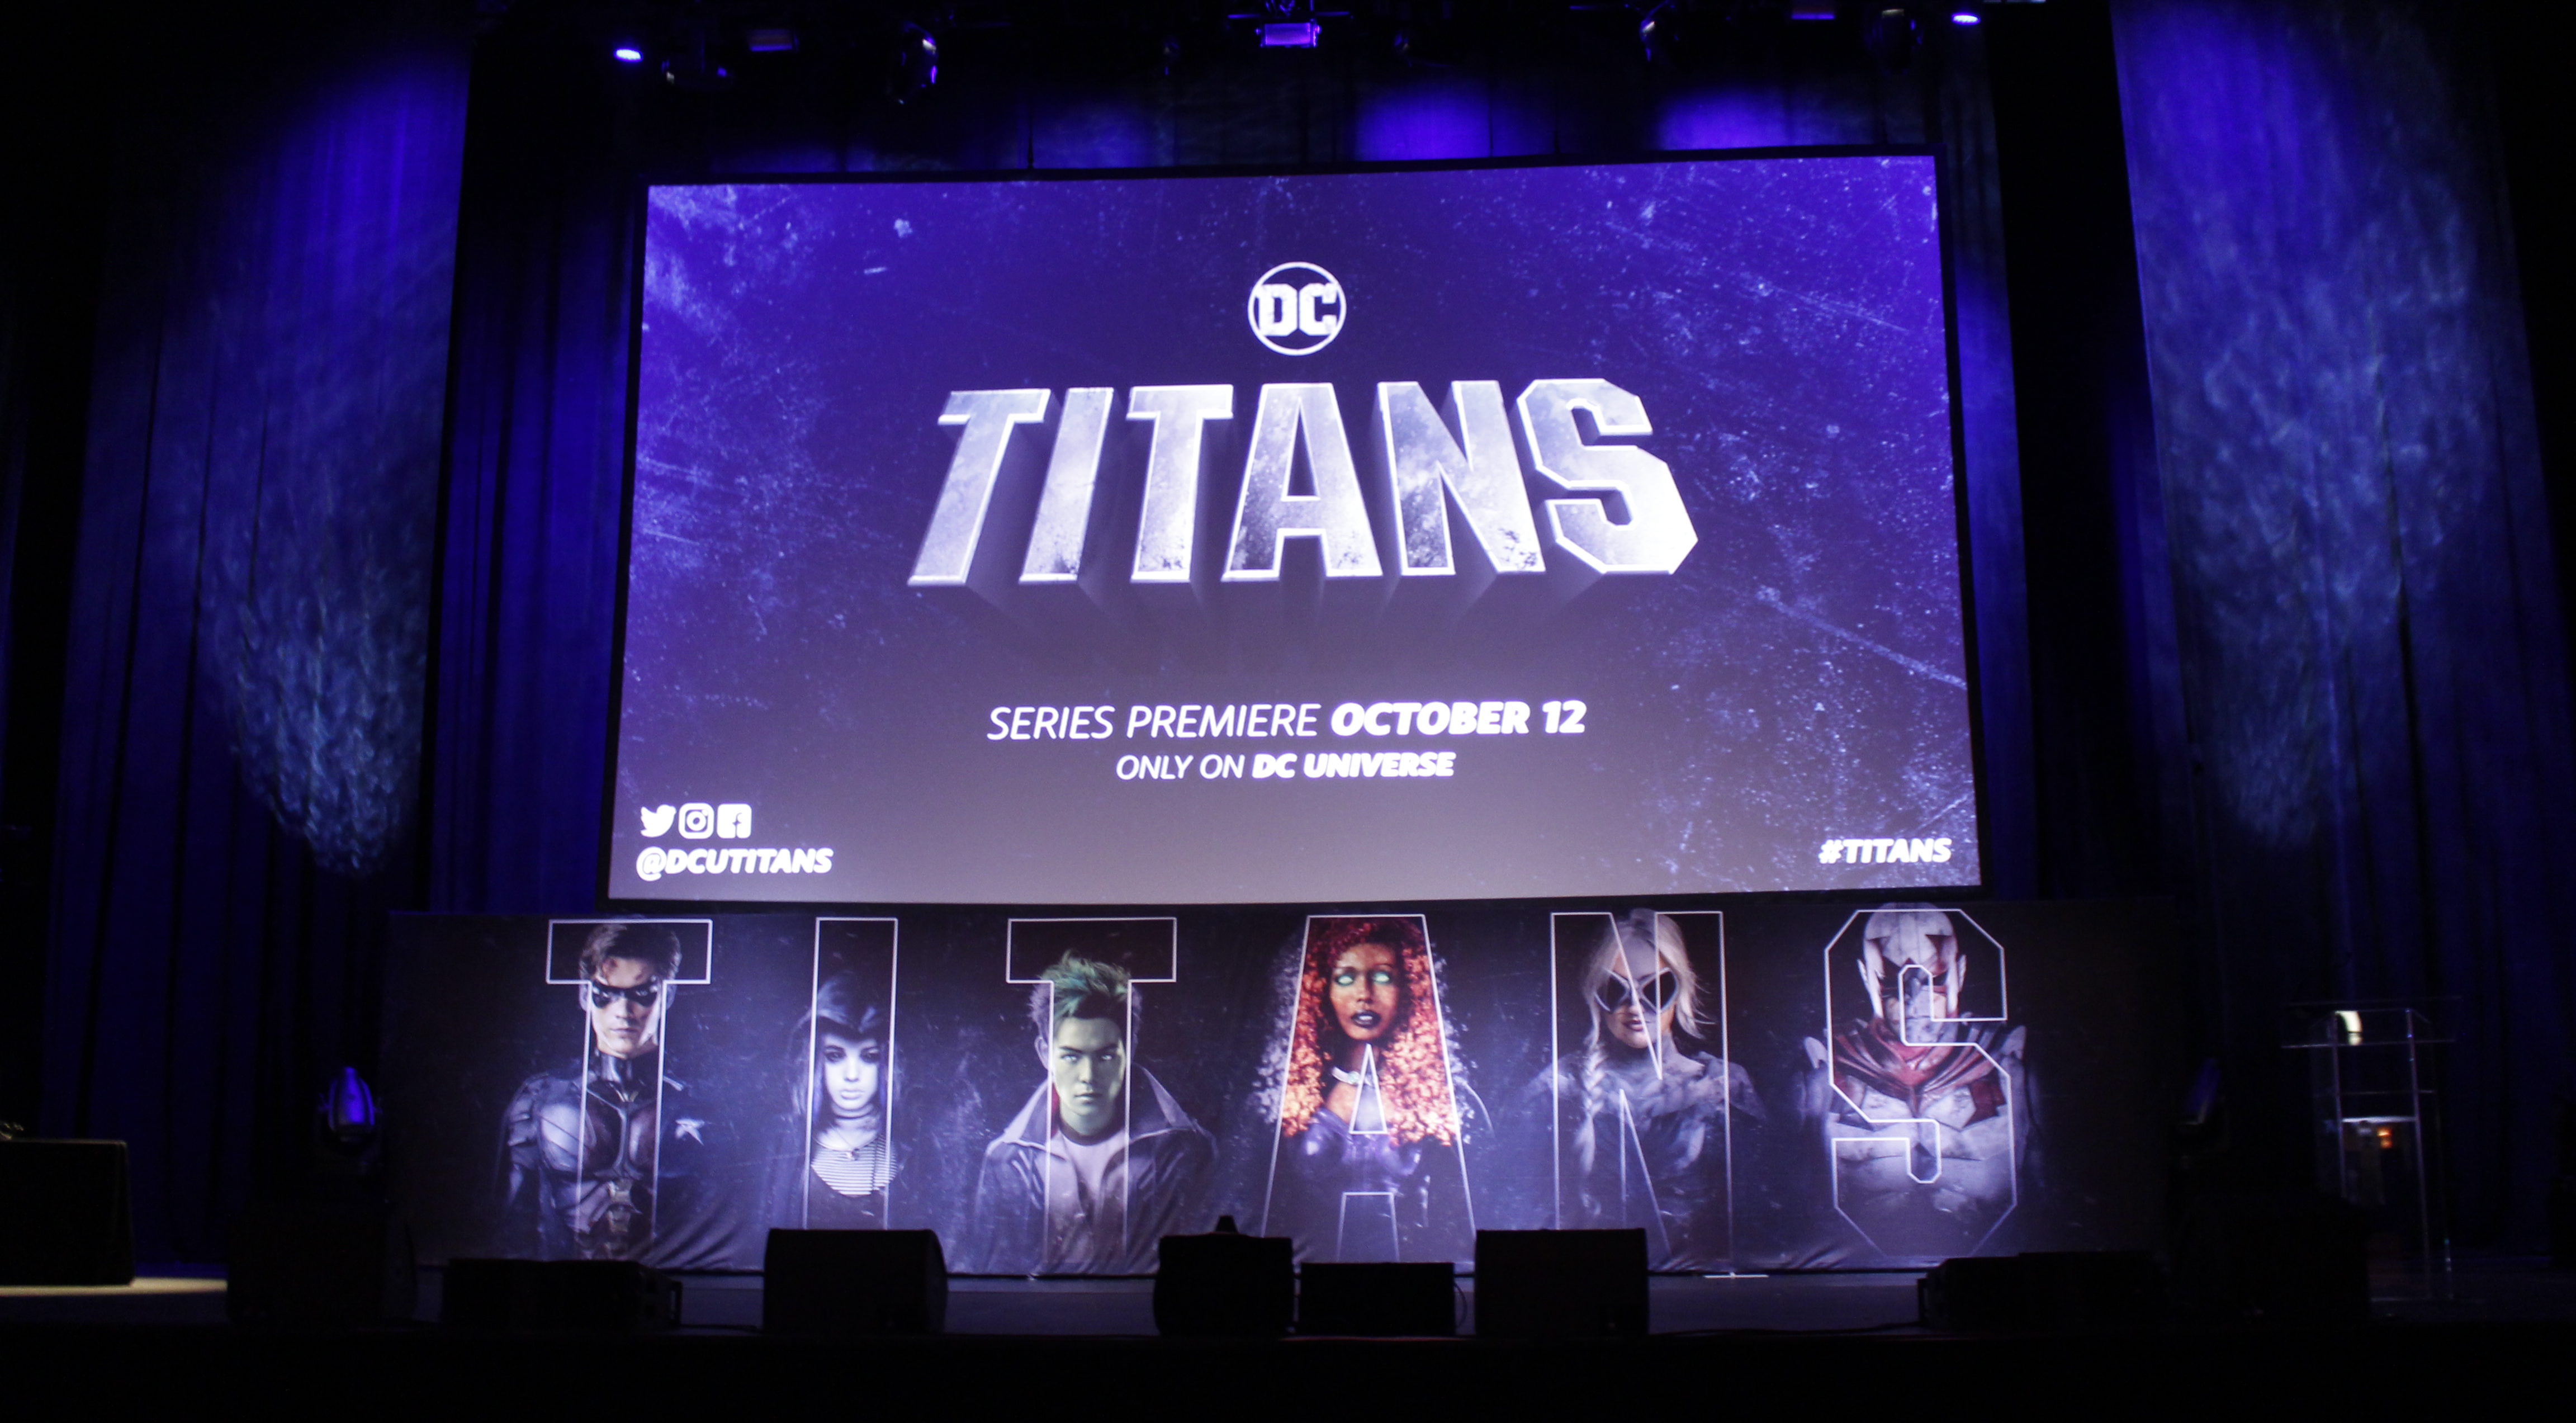 NYCC Kickoff with DC Universe Titans Premiere Event